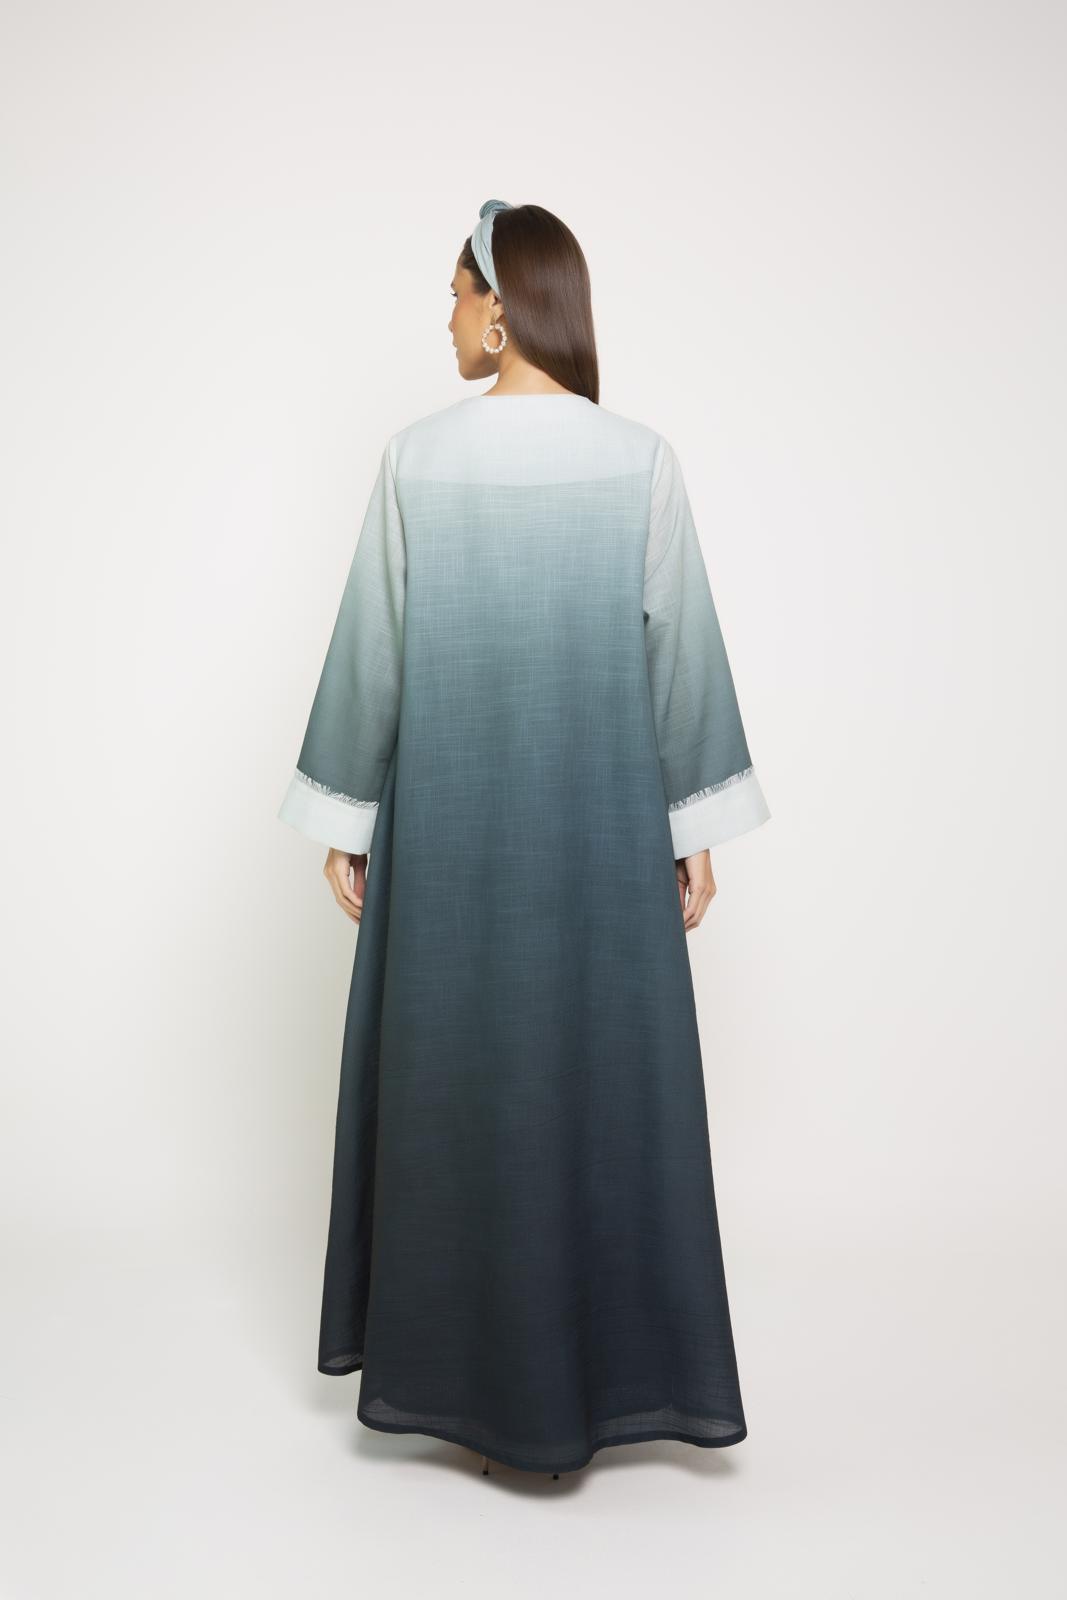 Ombré linen abaya with wide classic collar